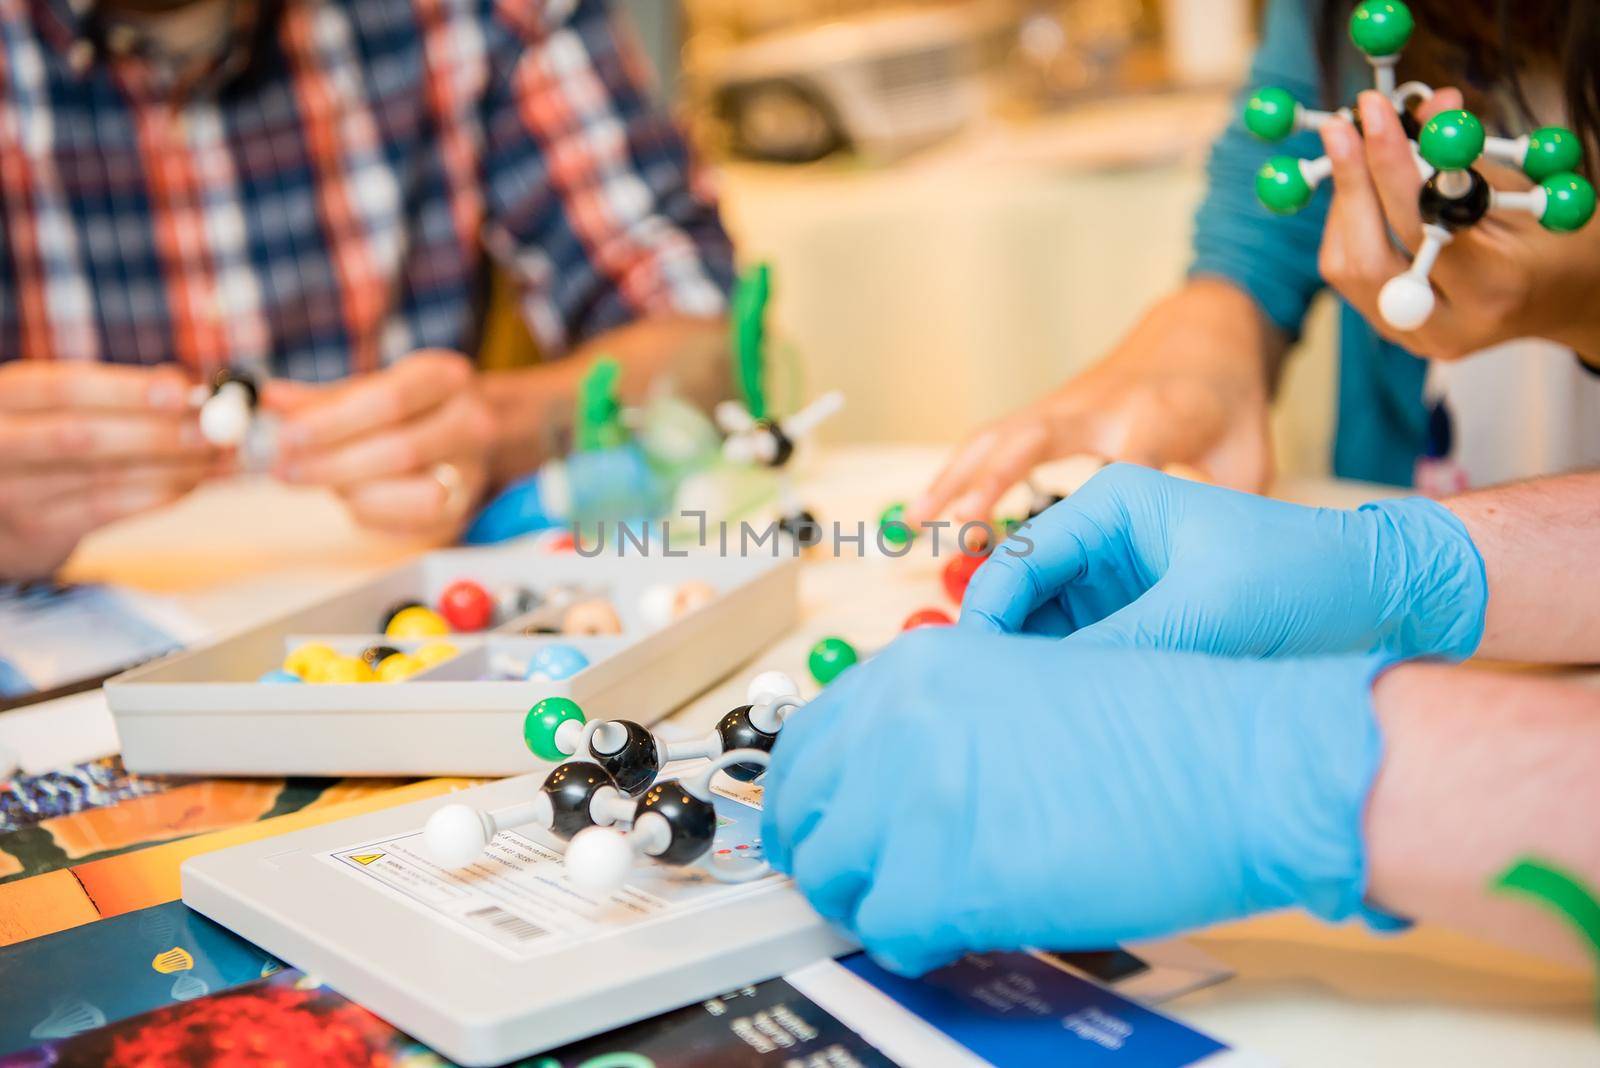 Up close view of young scientists wearing blue latex gloves working on an experiment with colorful DNA balls.